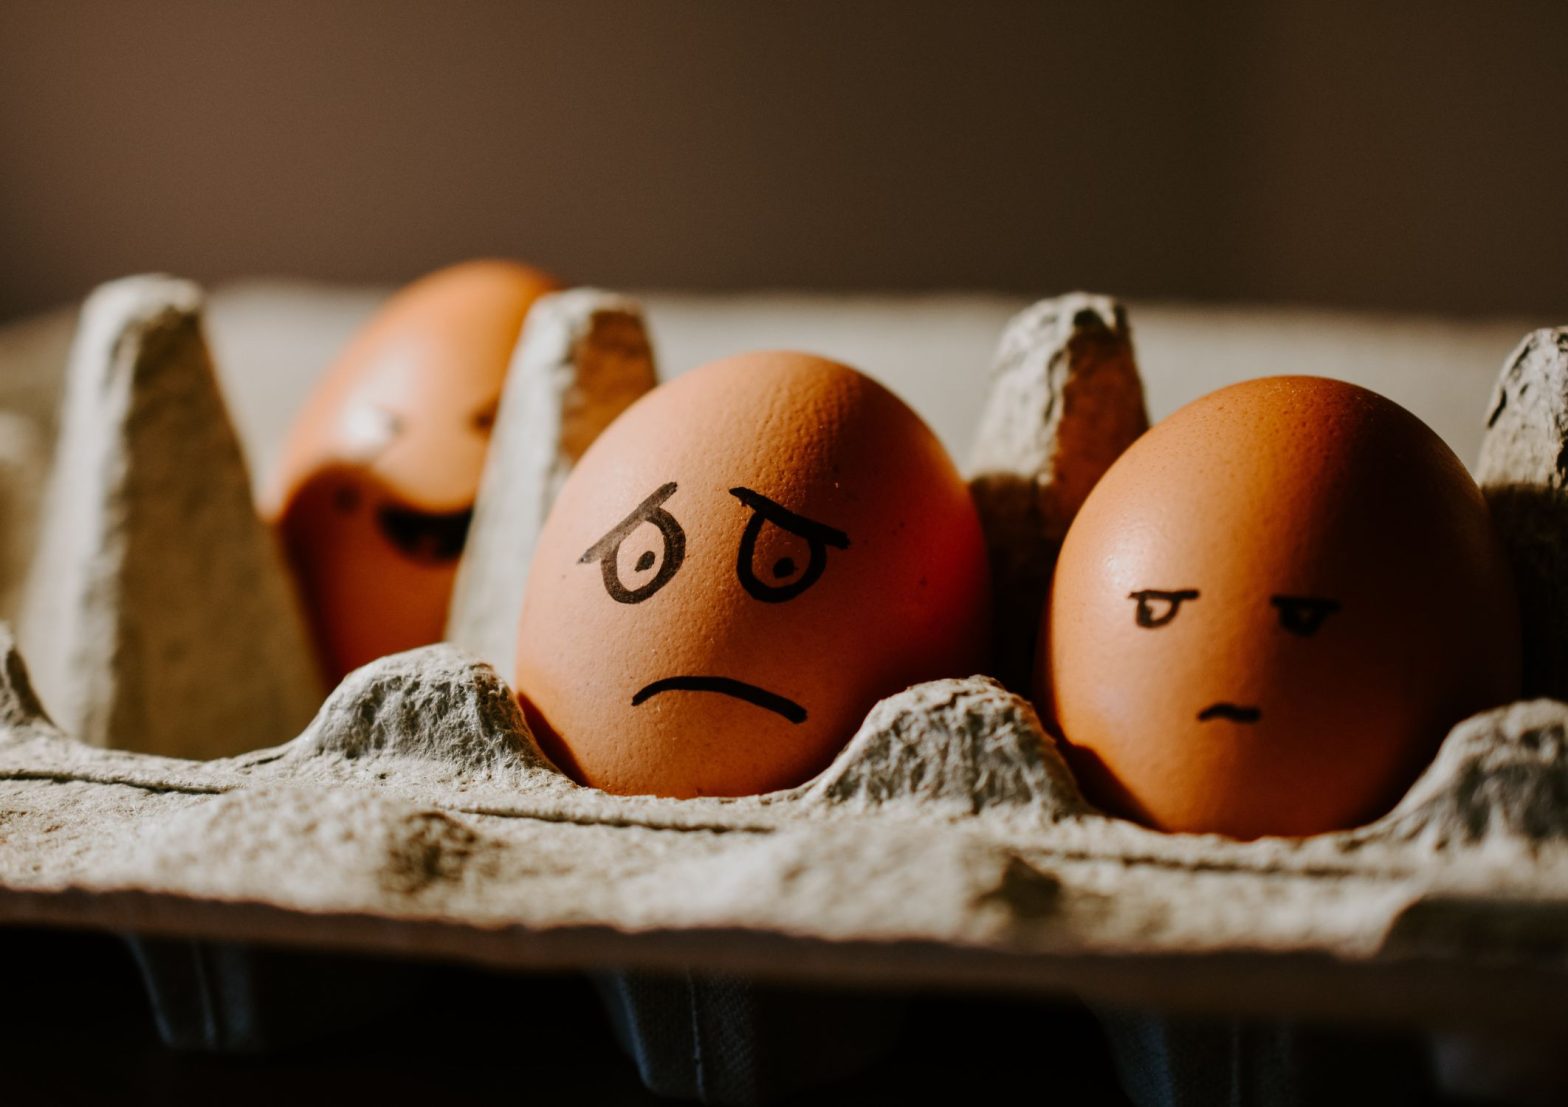 Image shows a box of eggs, two of which have worried looking faces drawn on to them